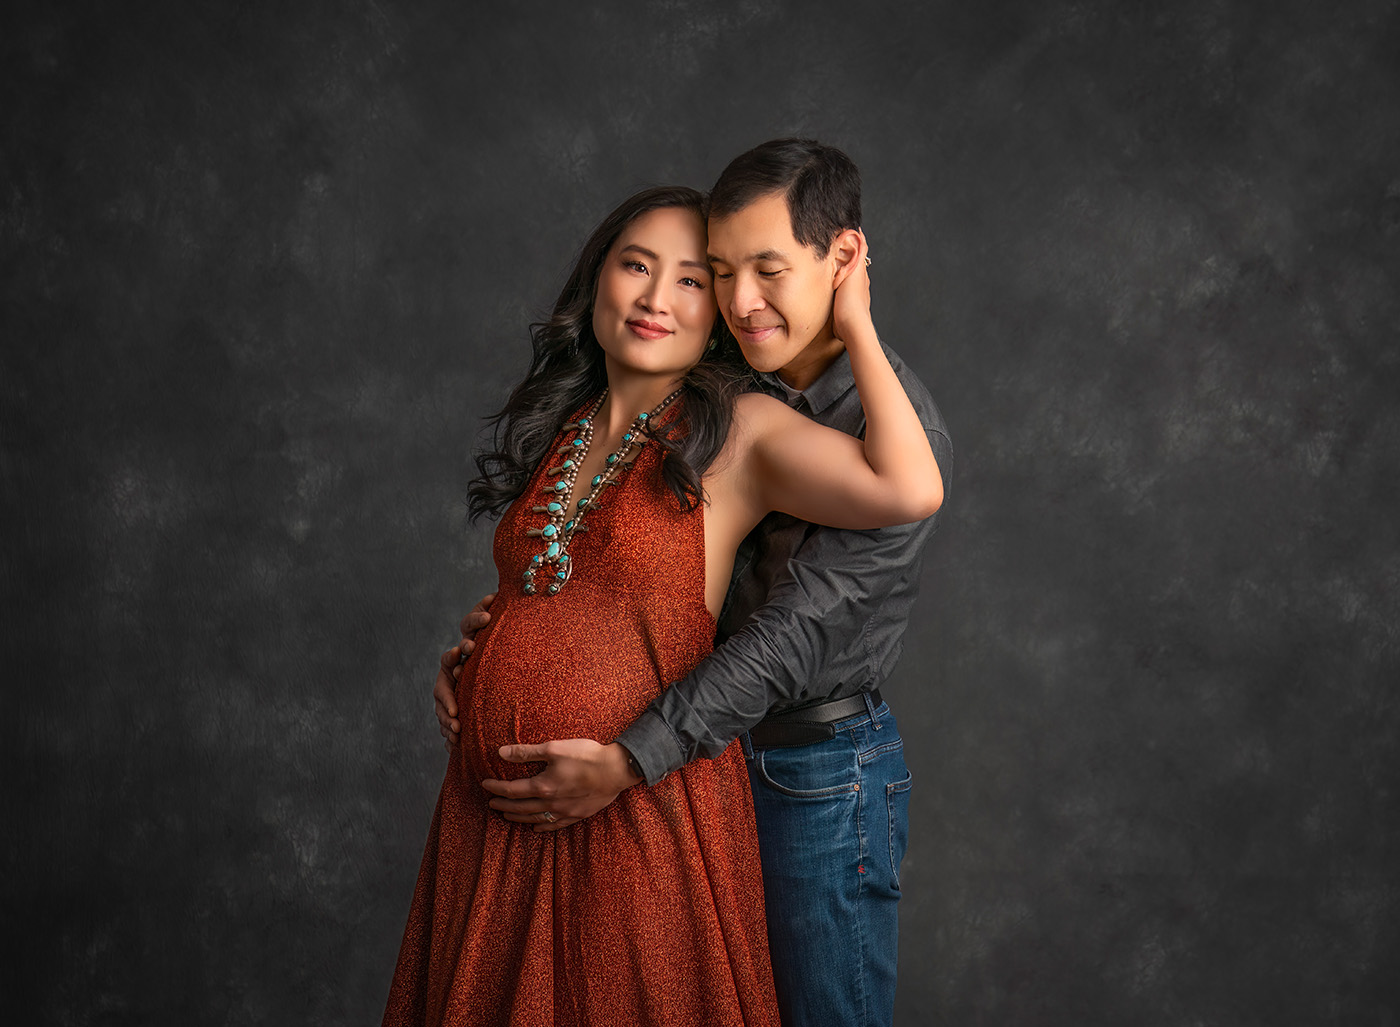 Luxury Maternity Photography beautiful Asian couple with pregnant mom and dad in loving embrace with beautiful squash blossom necklace